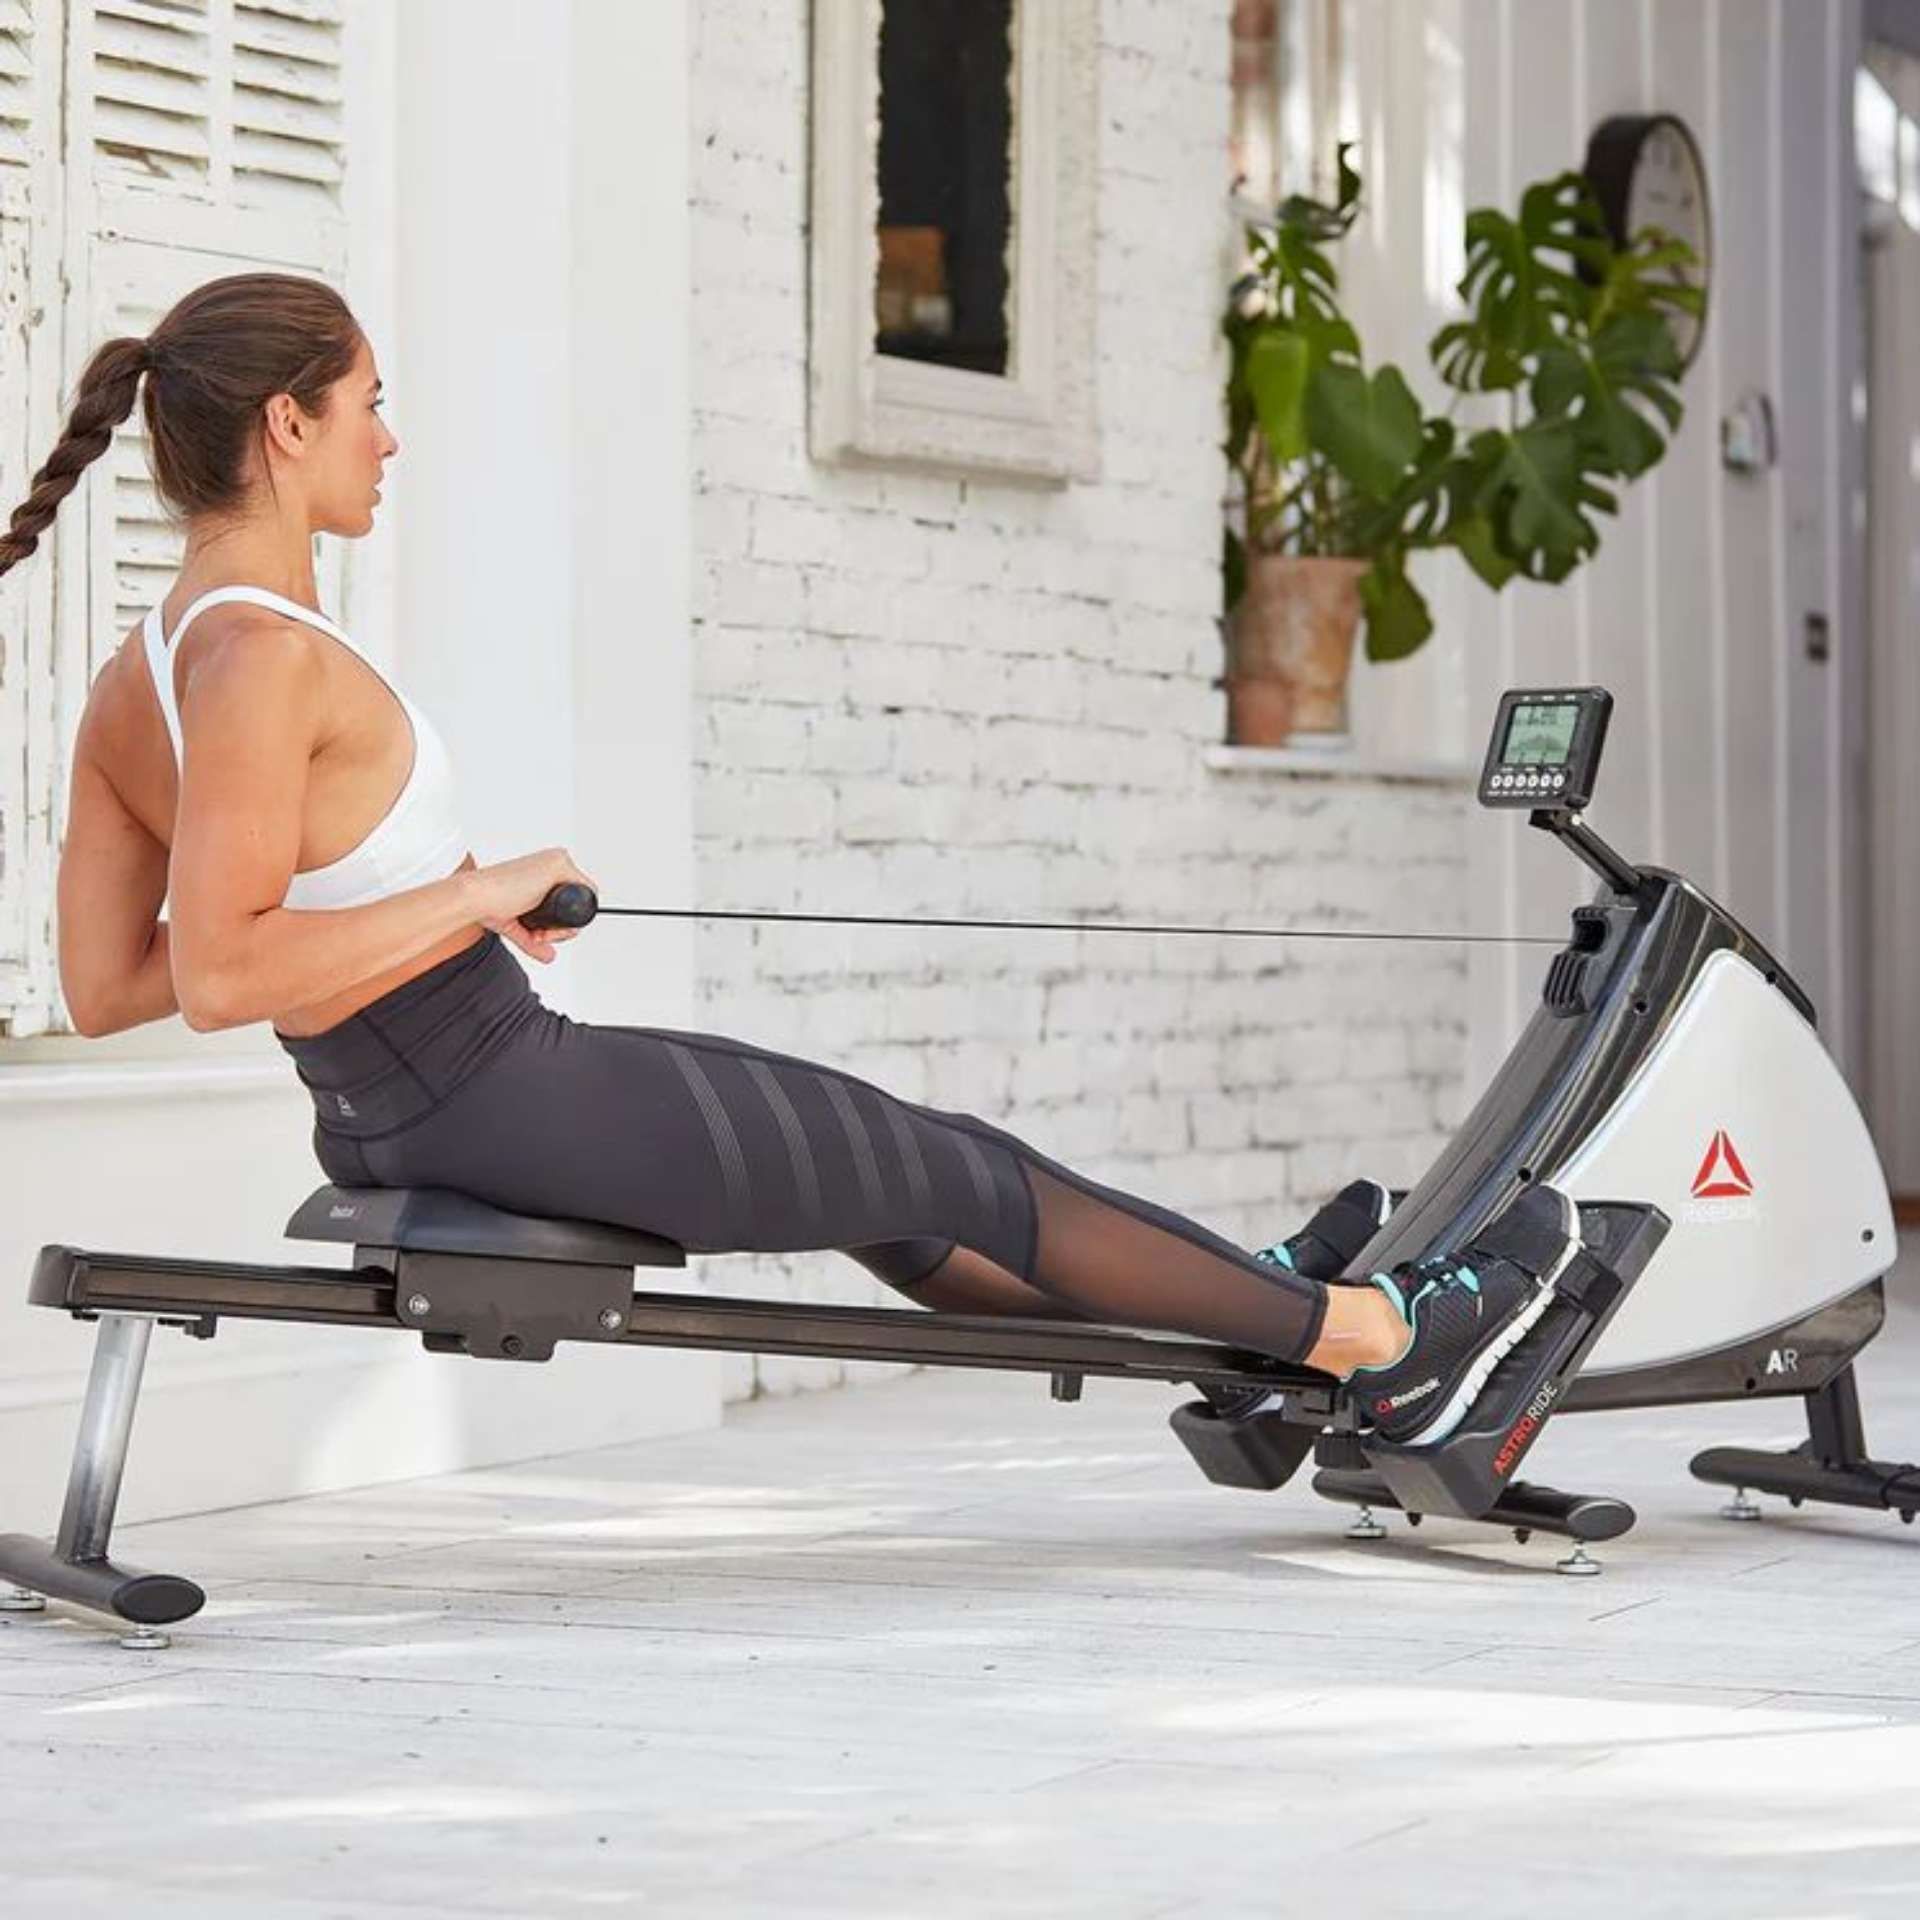 BRAND NEW REEBOK AR Rower. RRP £514.99 EACH R18-4. Designed for you to create more effective and - Image 4 of 4